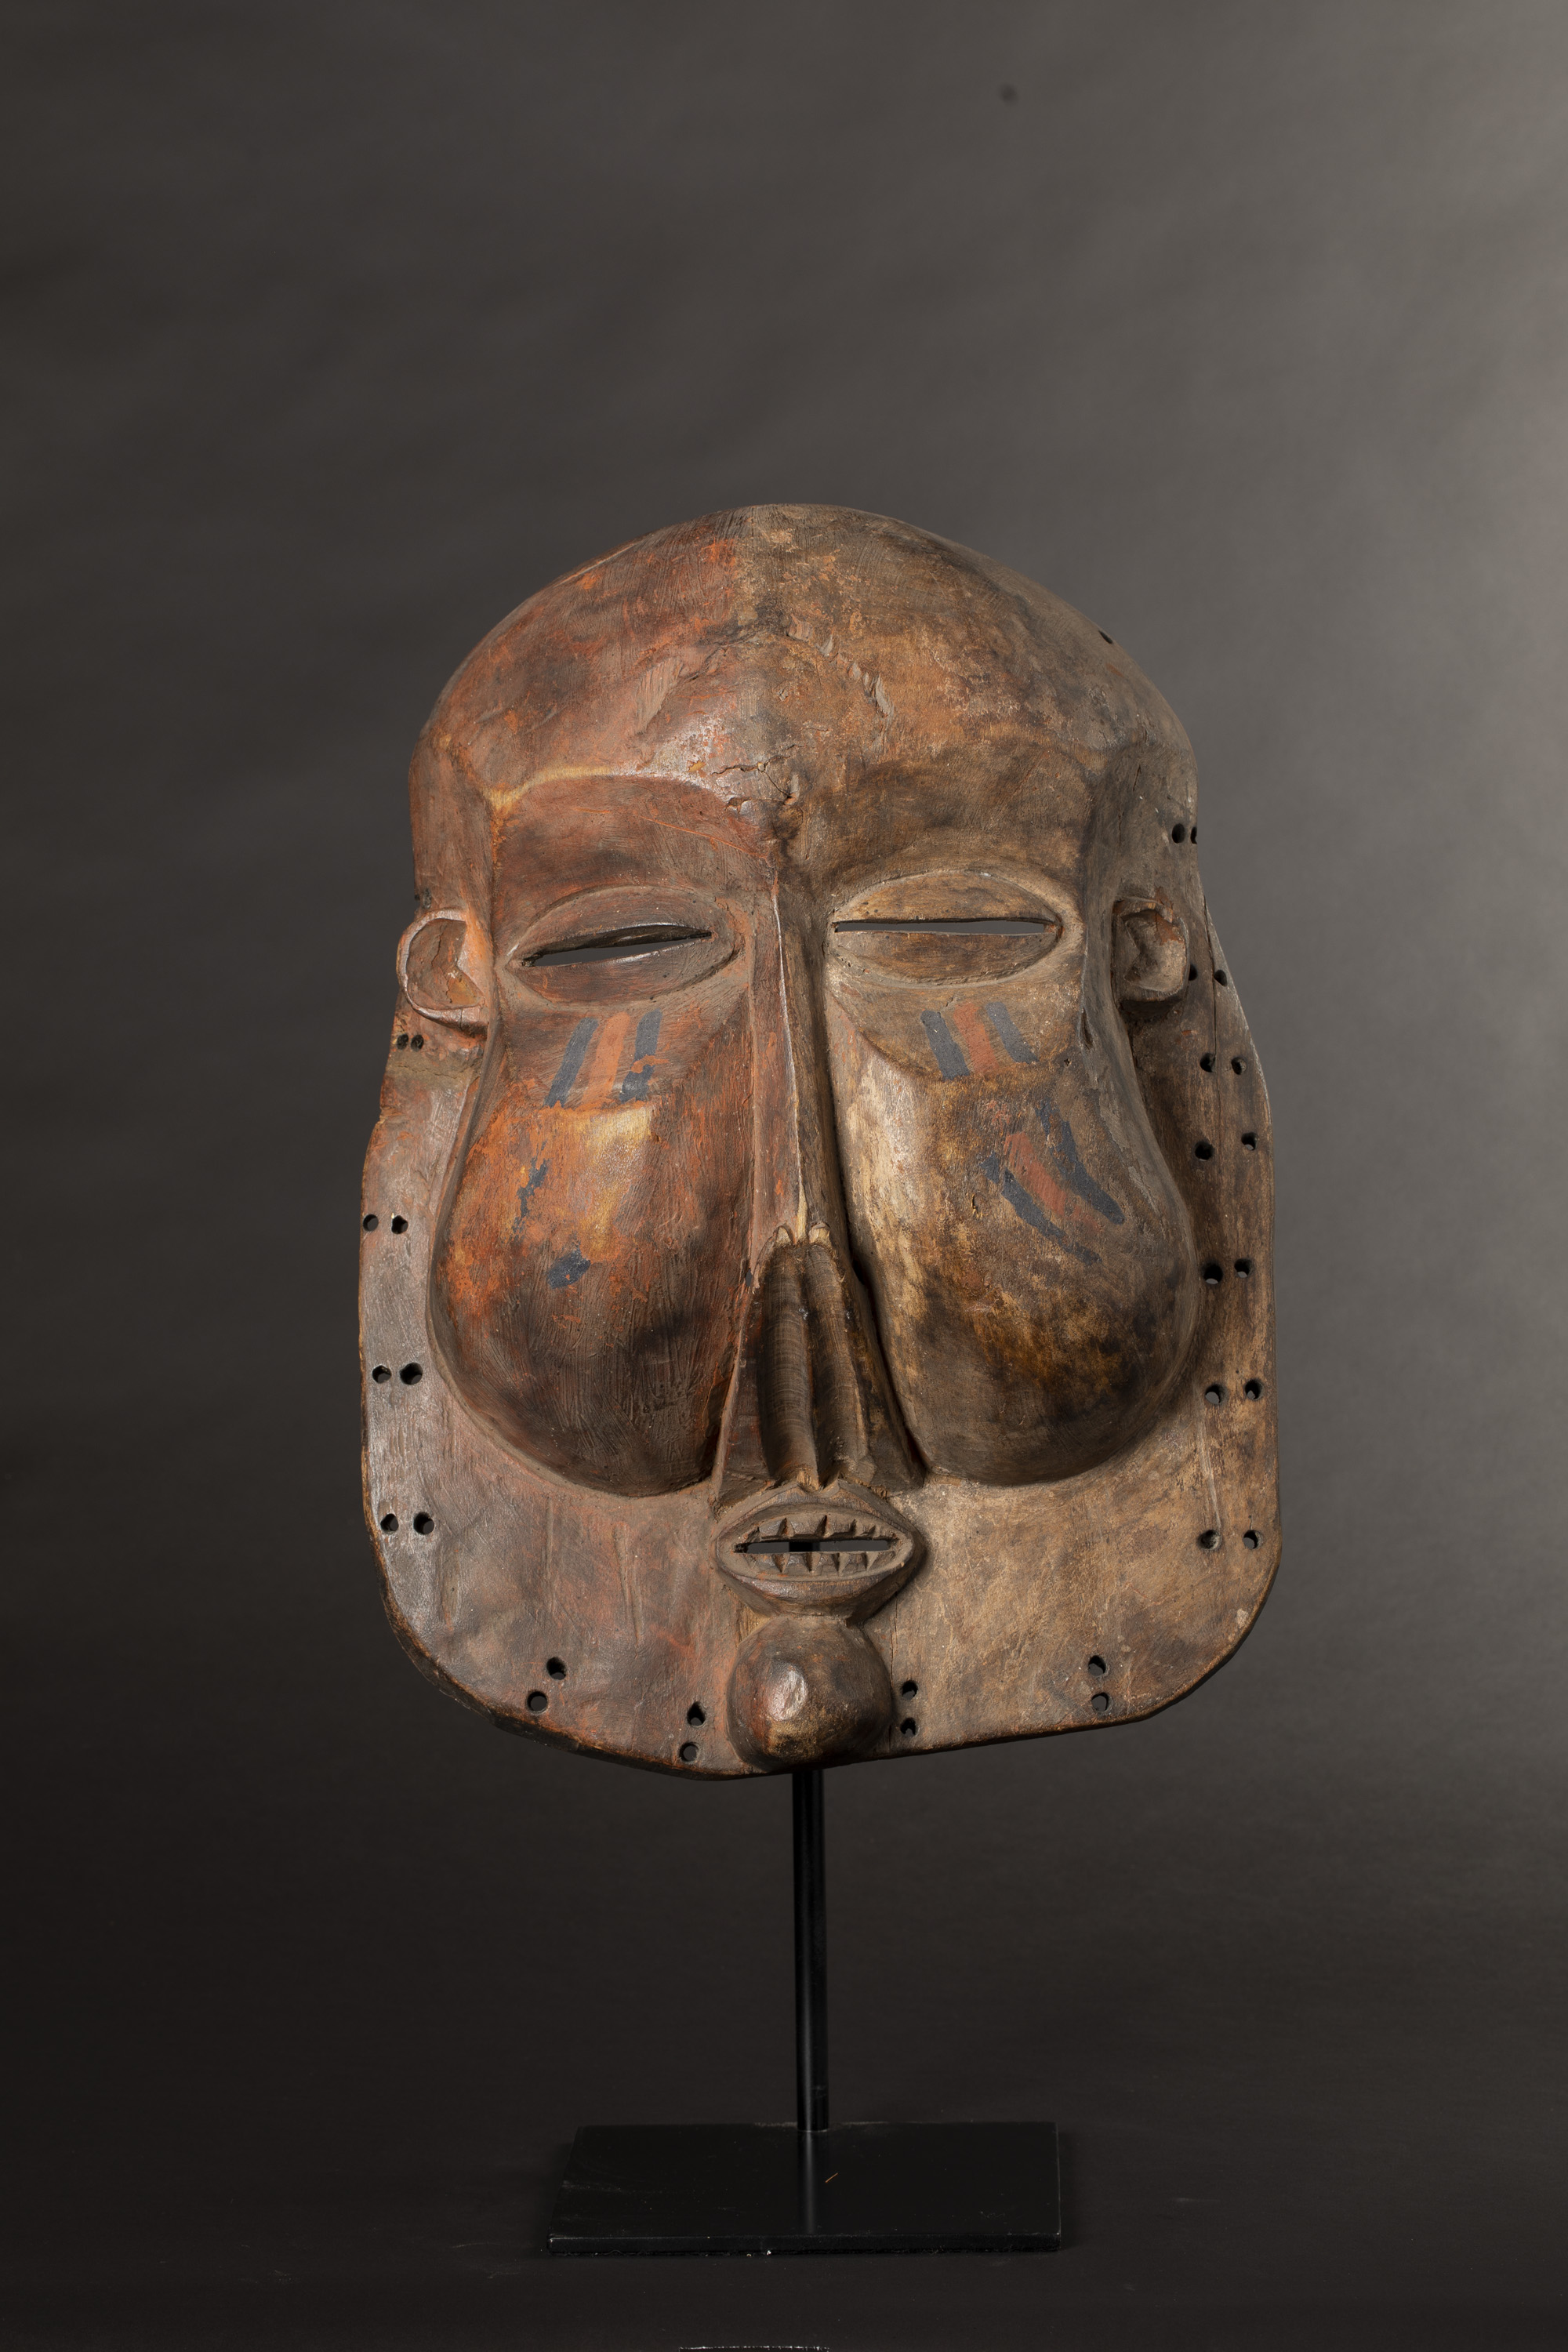 A Yaka Suku People Dance Mask from the Democratic Republic of Congo Africa